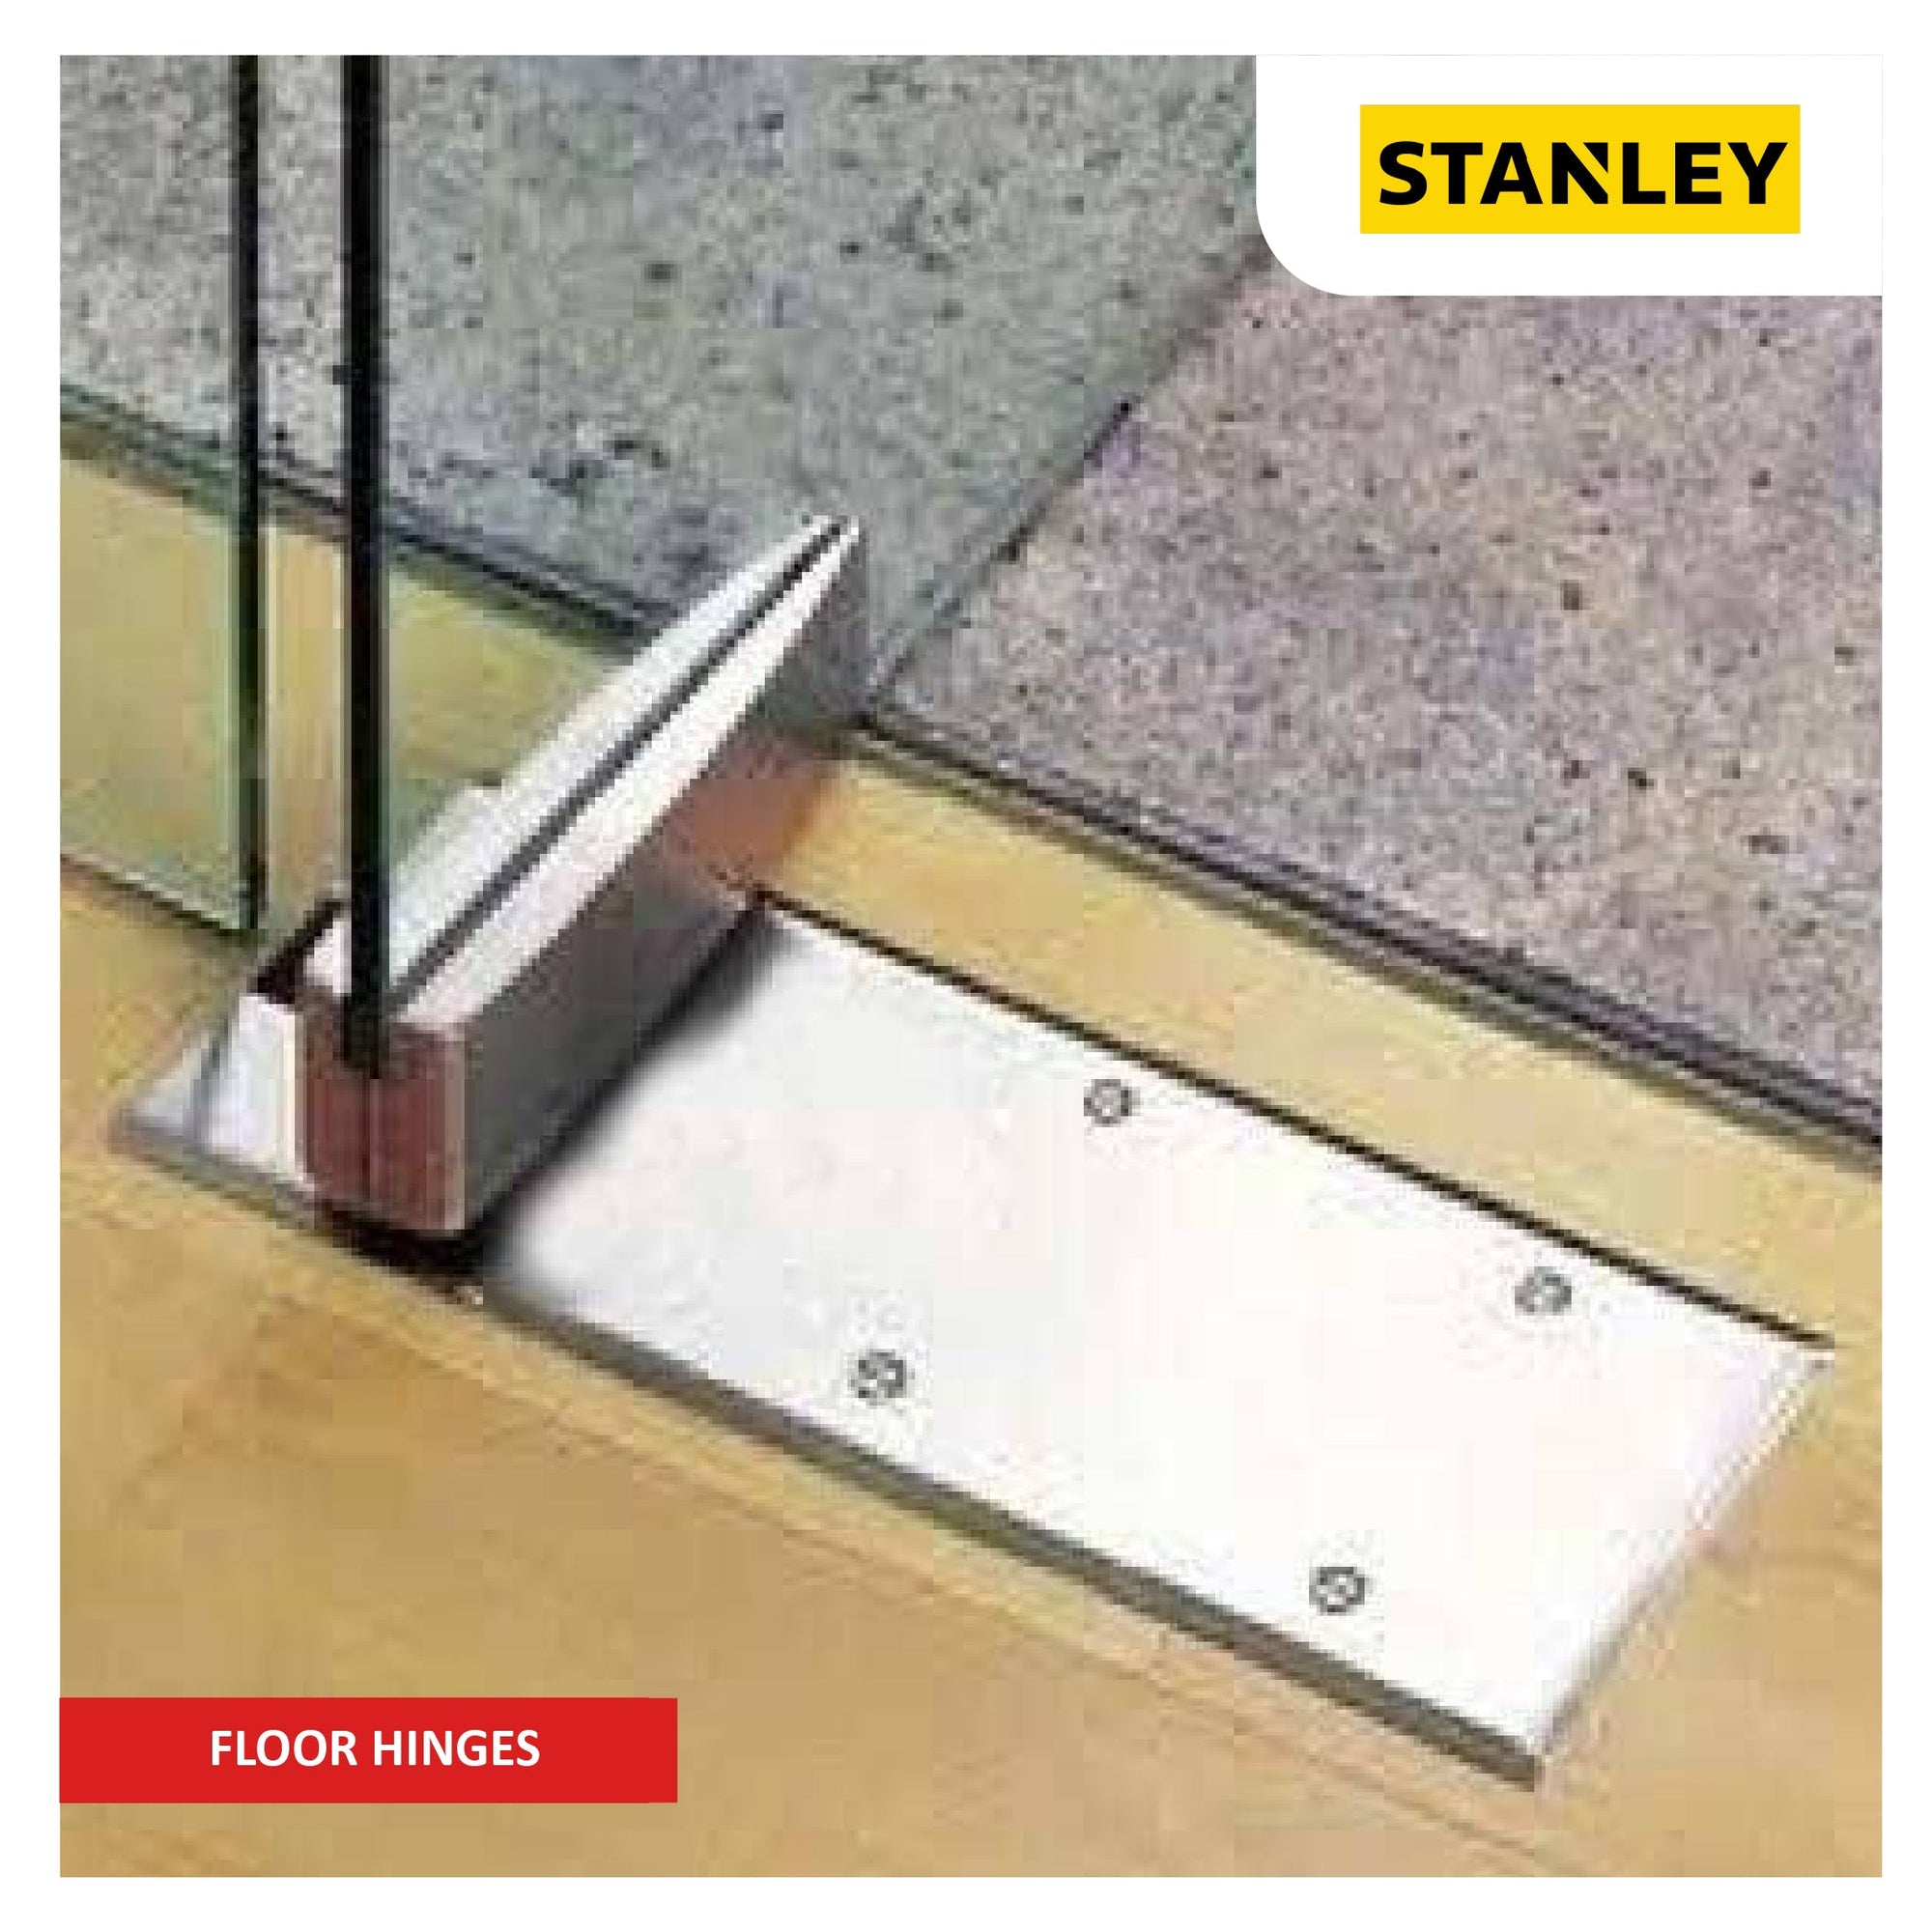 Stanley Floor Hinges - Browse our collection of durable and versatile floor hinges for smooth door operation - M. M. Noorbhoy & Co.